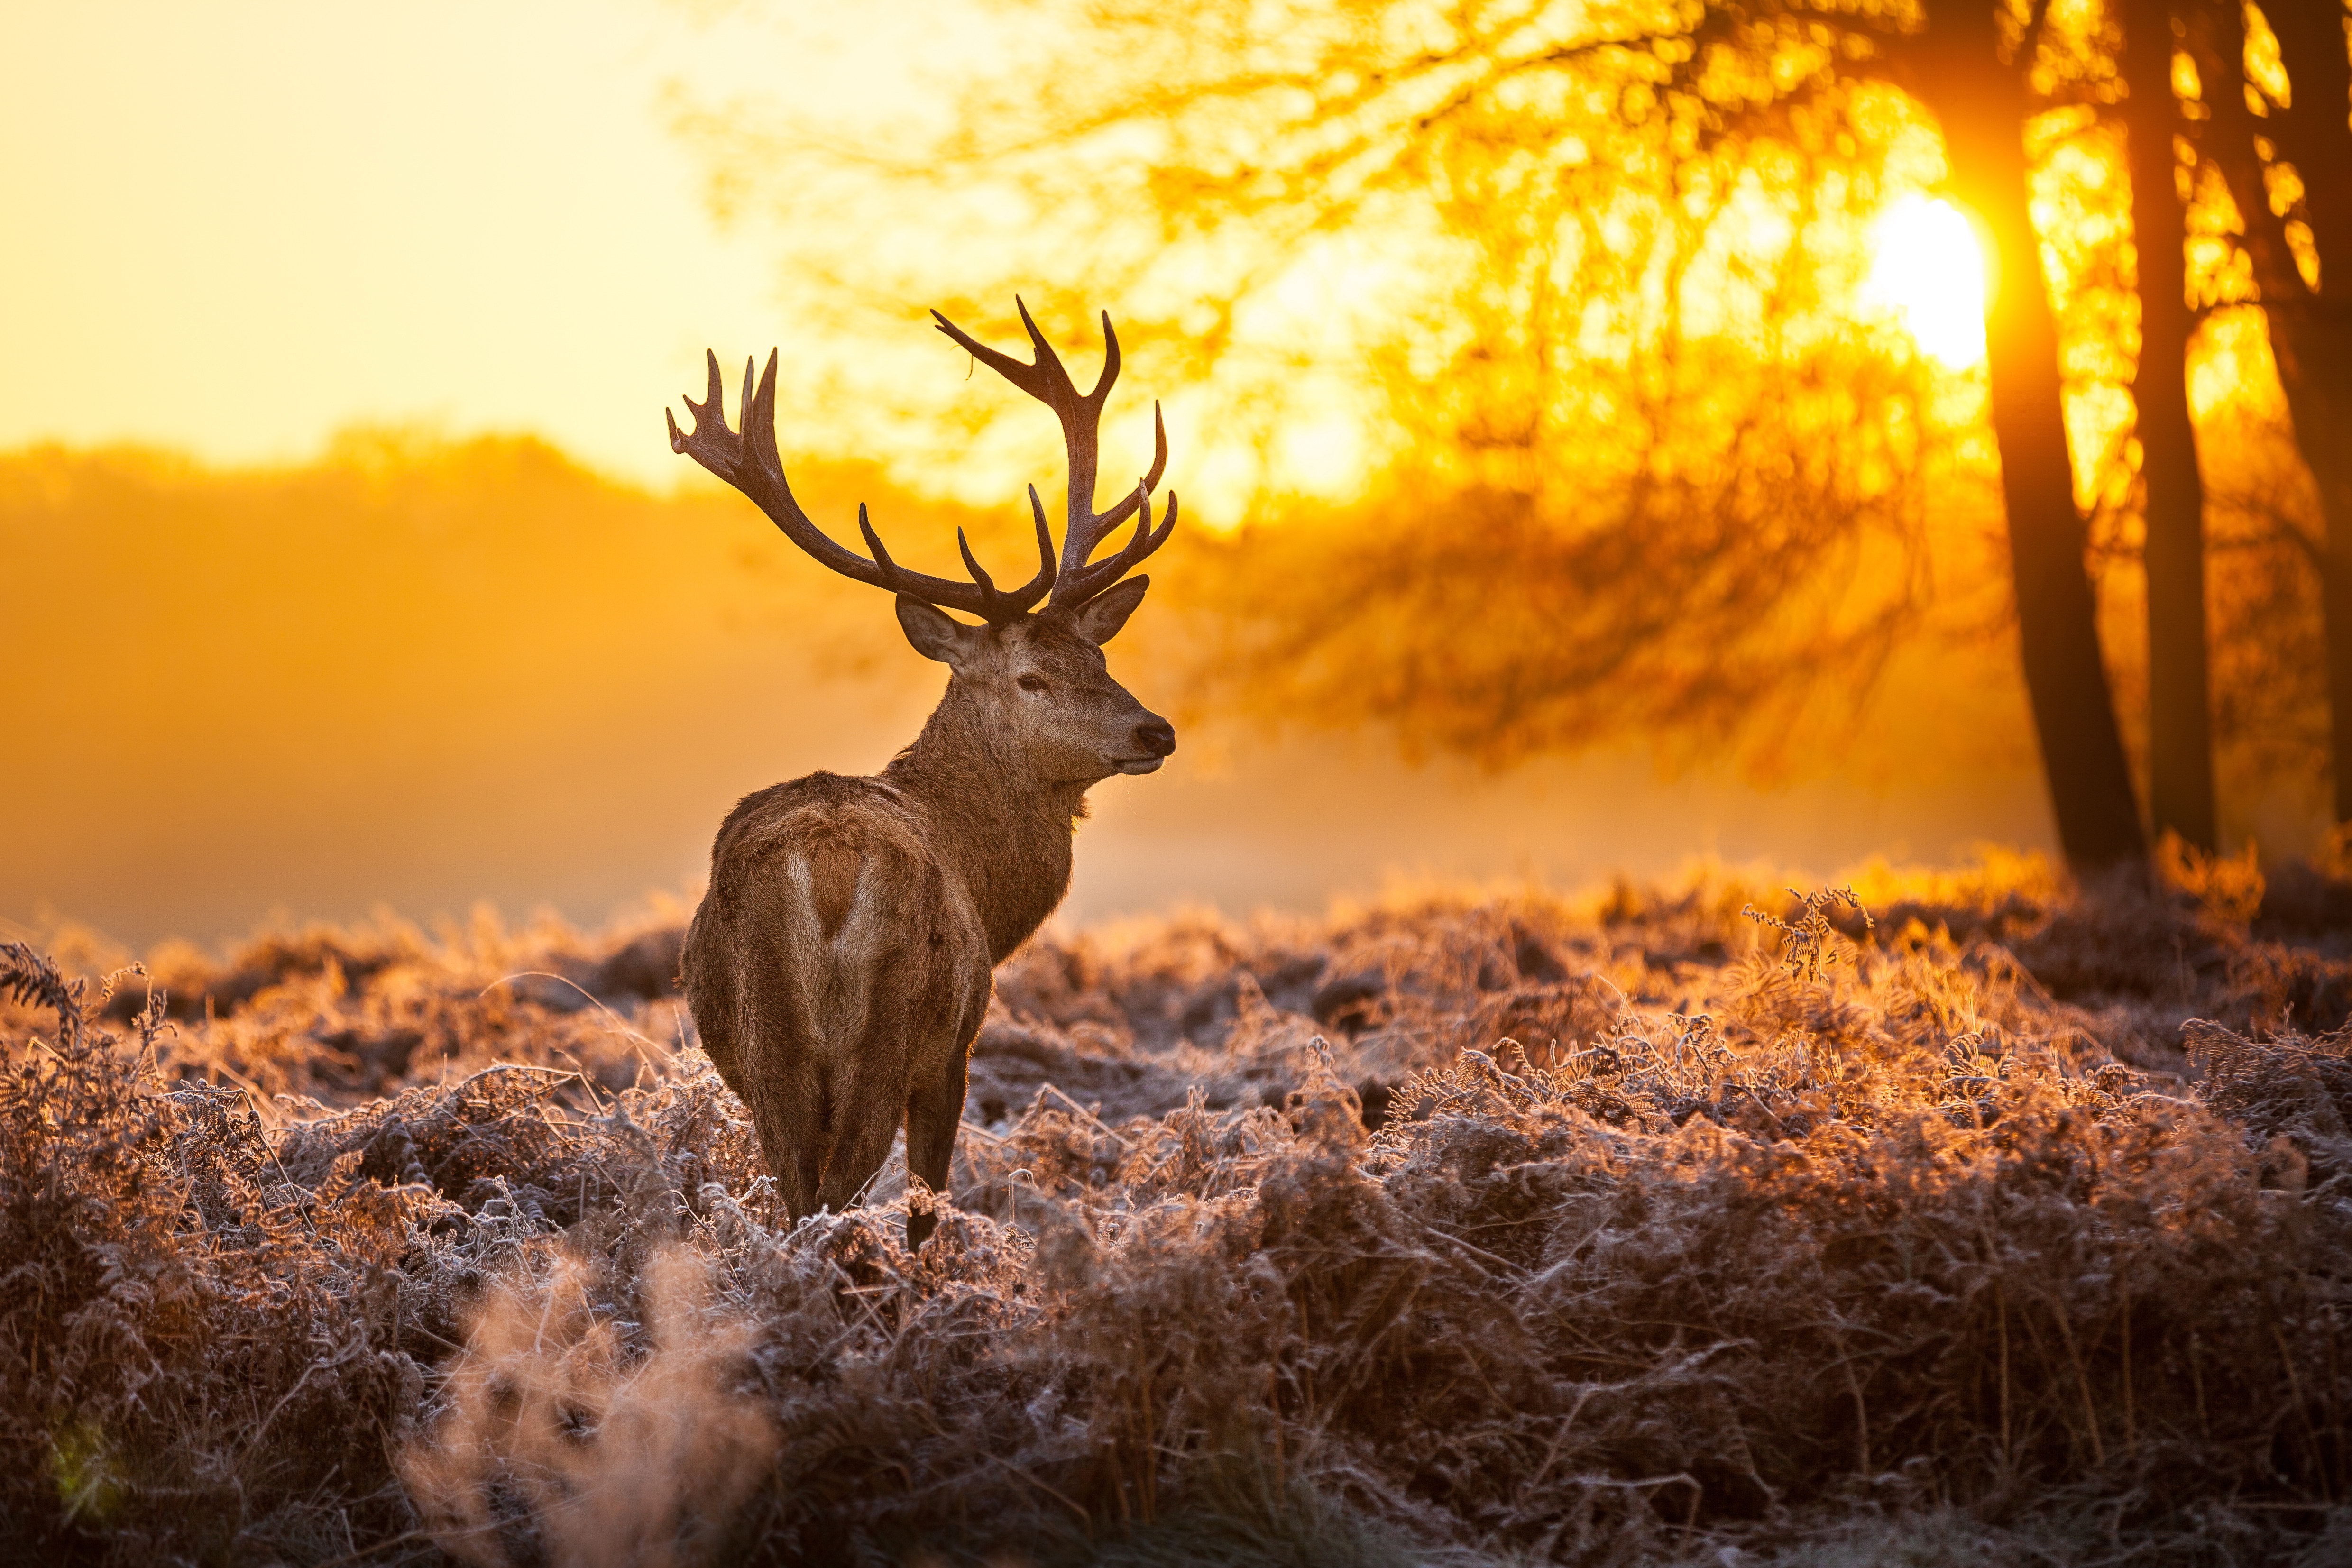 Picture Deer Horns Winter Snow sunrise and sunset Grass Glance Animals Seasons 4960x3307 Sunrises and sunsets animal Staring